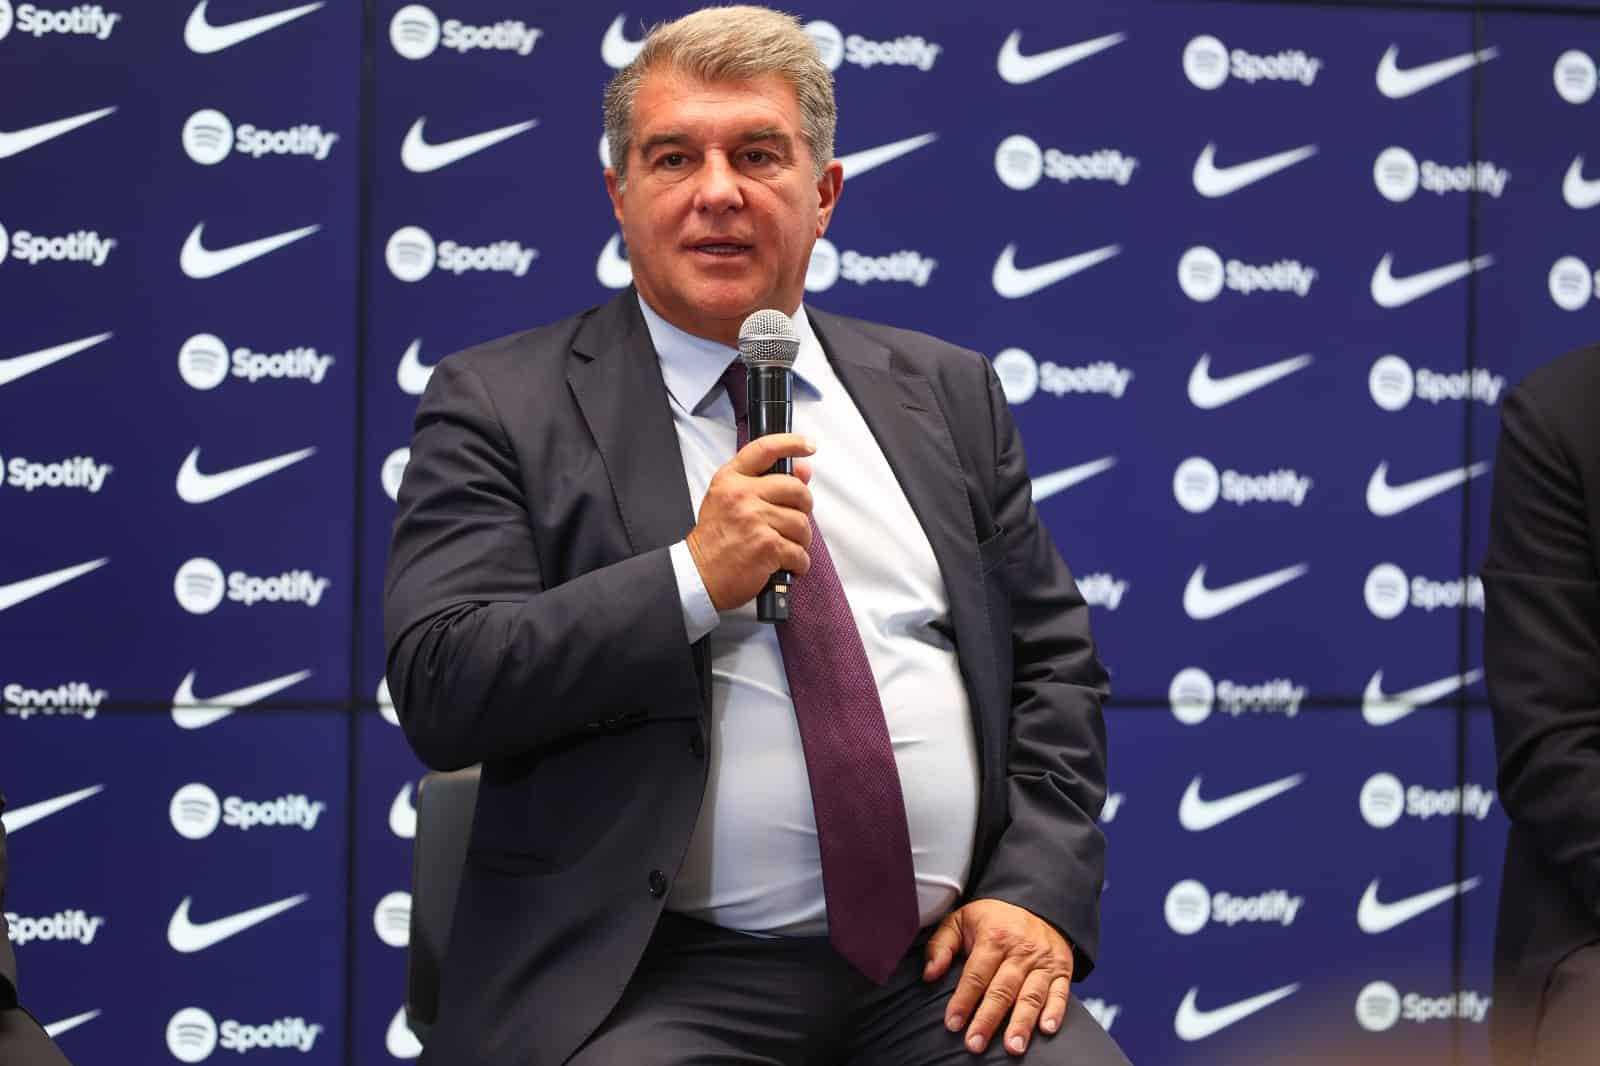 Barcelona - President Joan Laporta does not give up after accusations of bribery